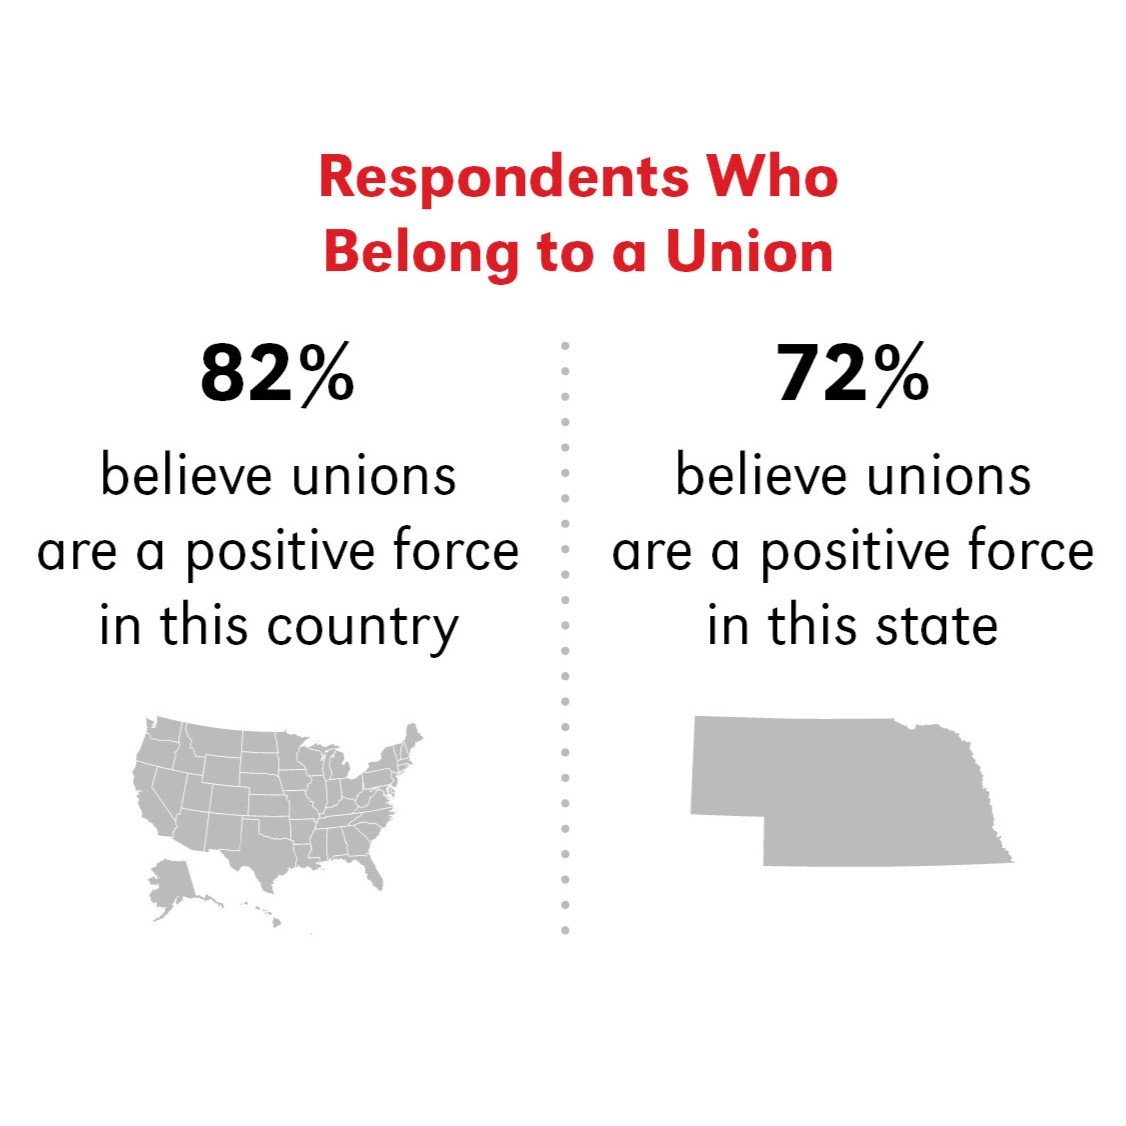 respondents who belong to a union, 82% believe unions are a positive force in this country with an icon of the United States, 72% believe unions are a positive force in this state with an icon of the state of Nebraska